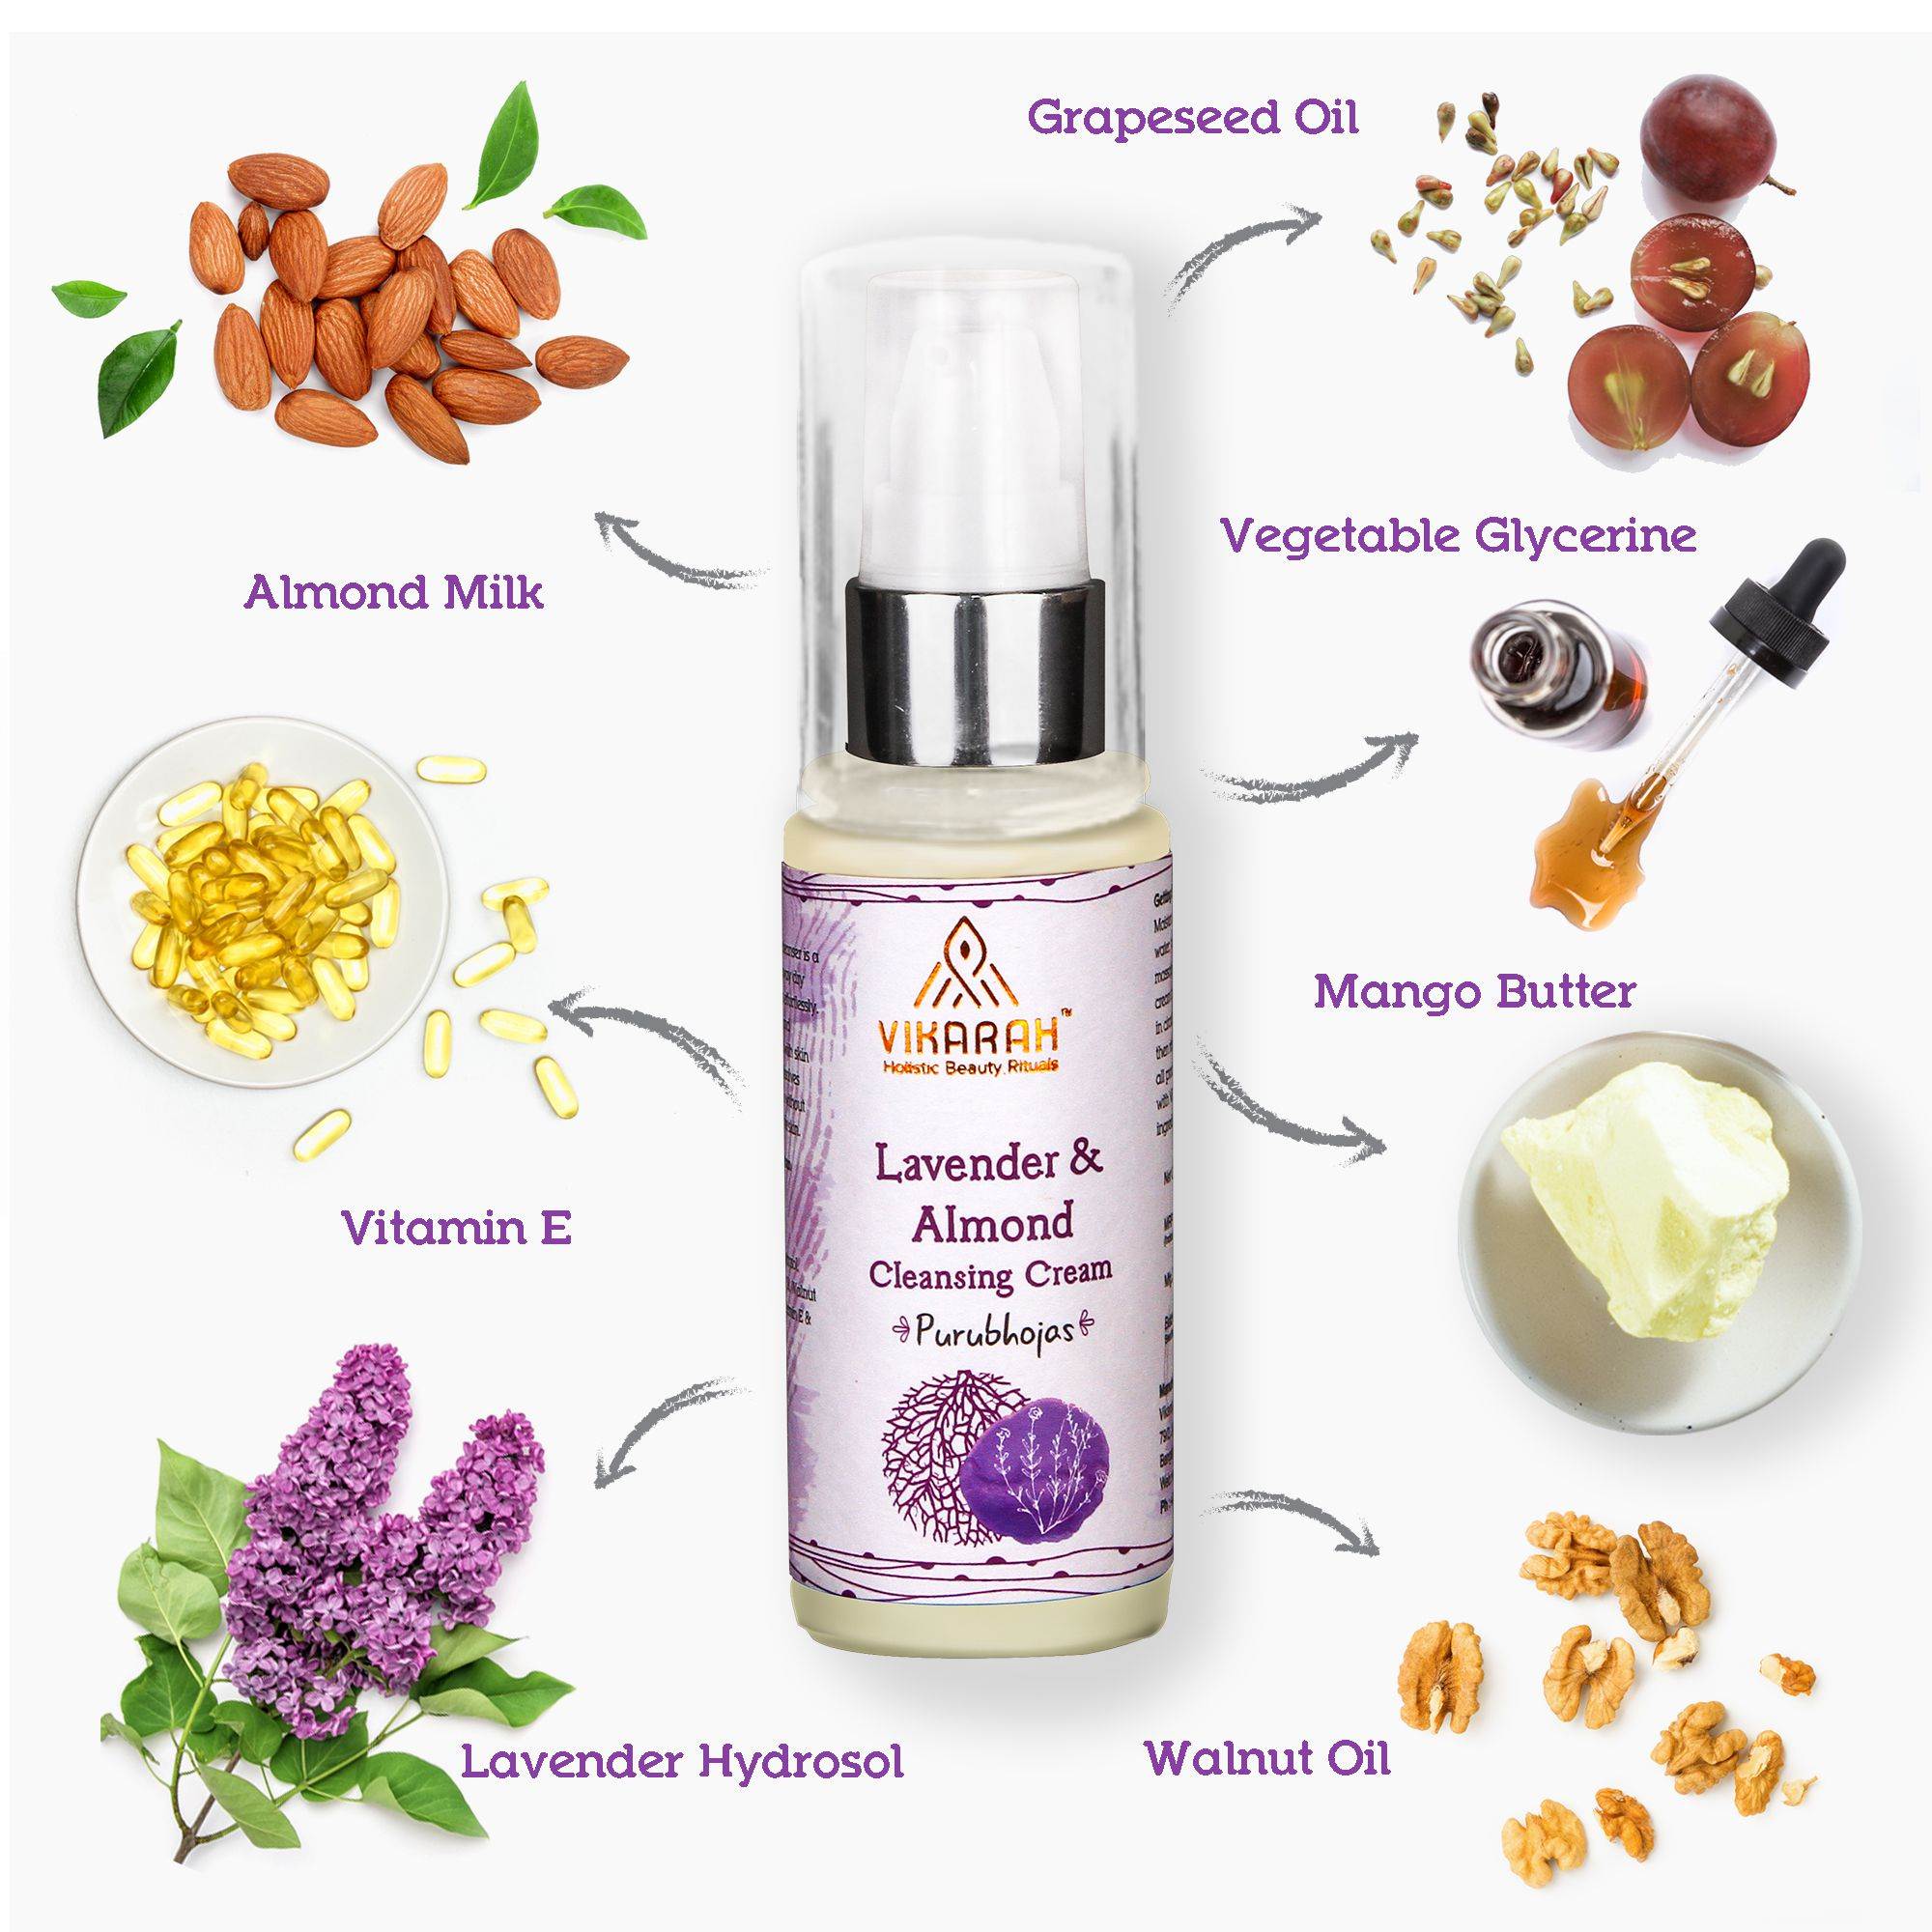 Lavender And Almond Cleansing Cream